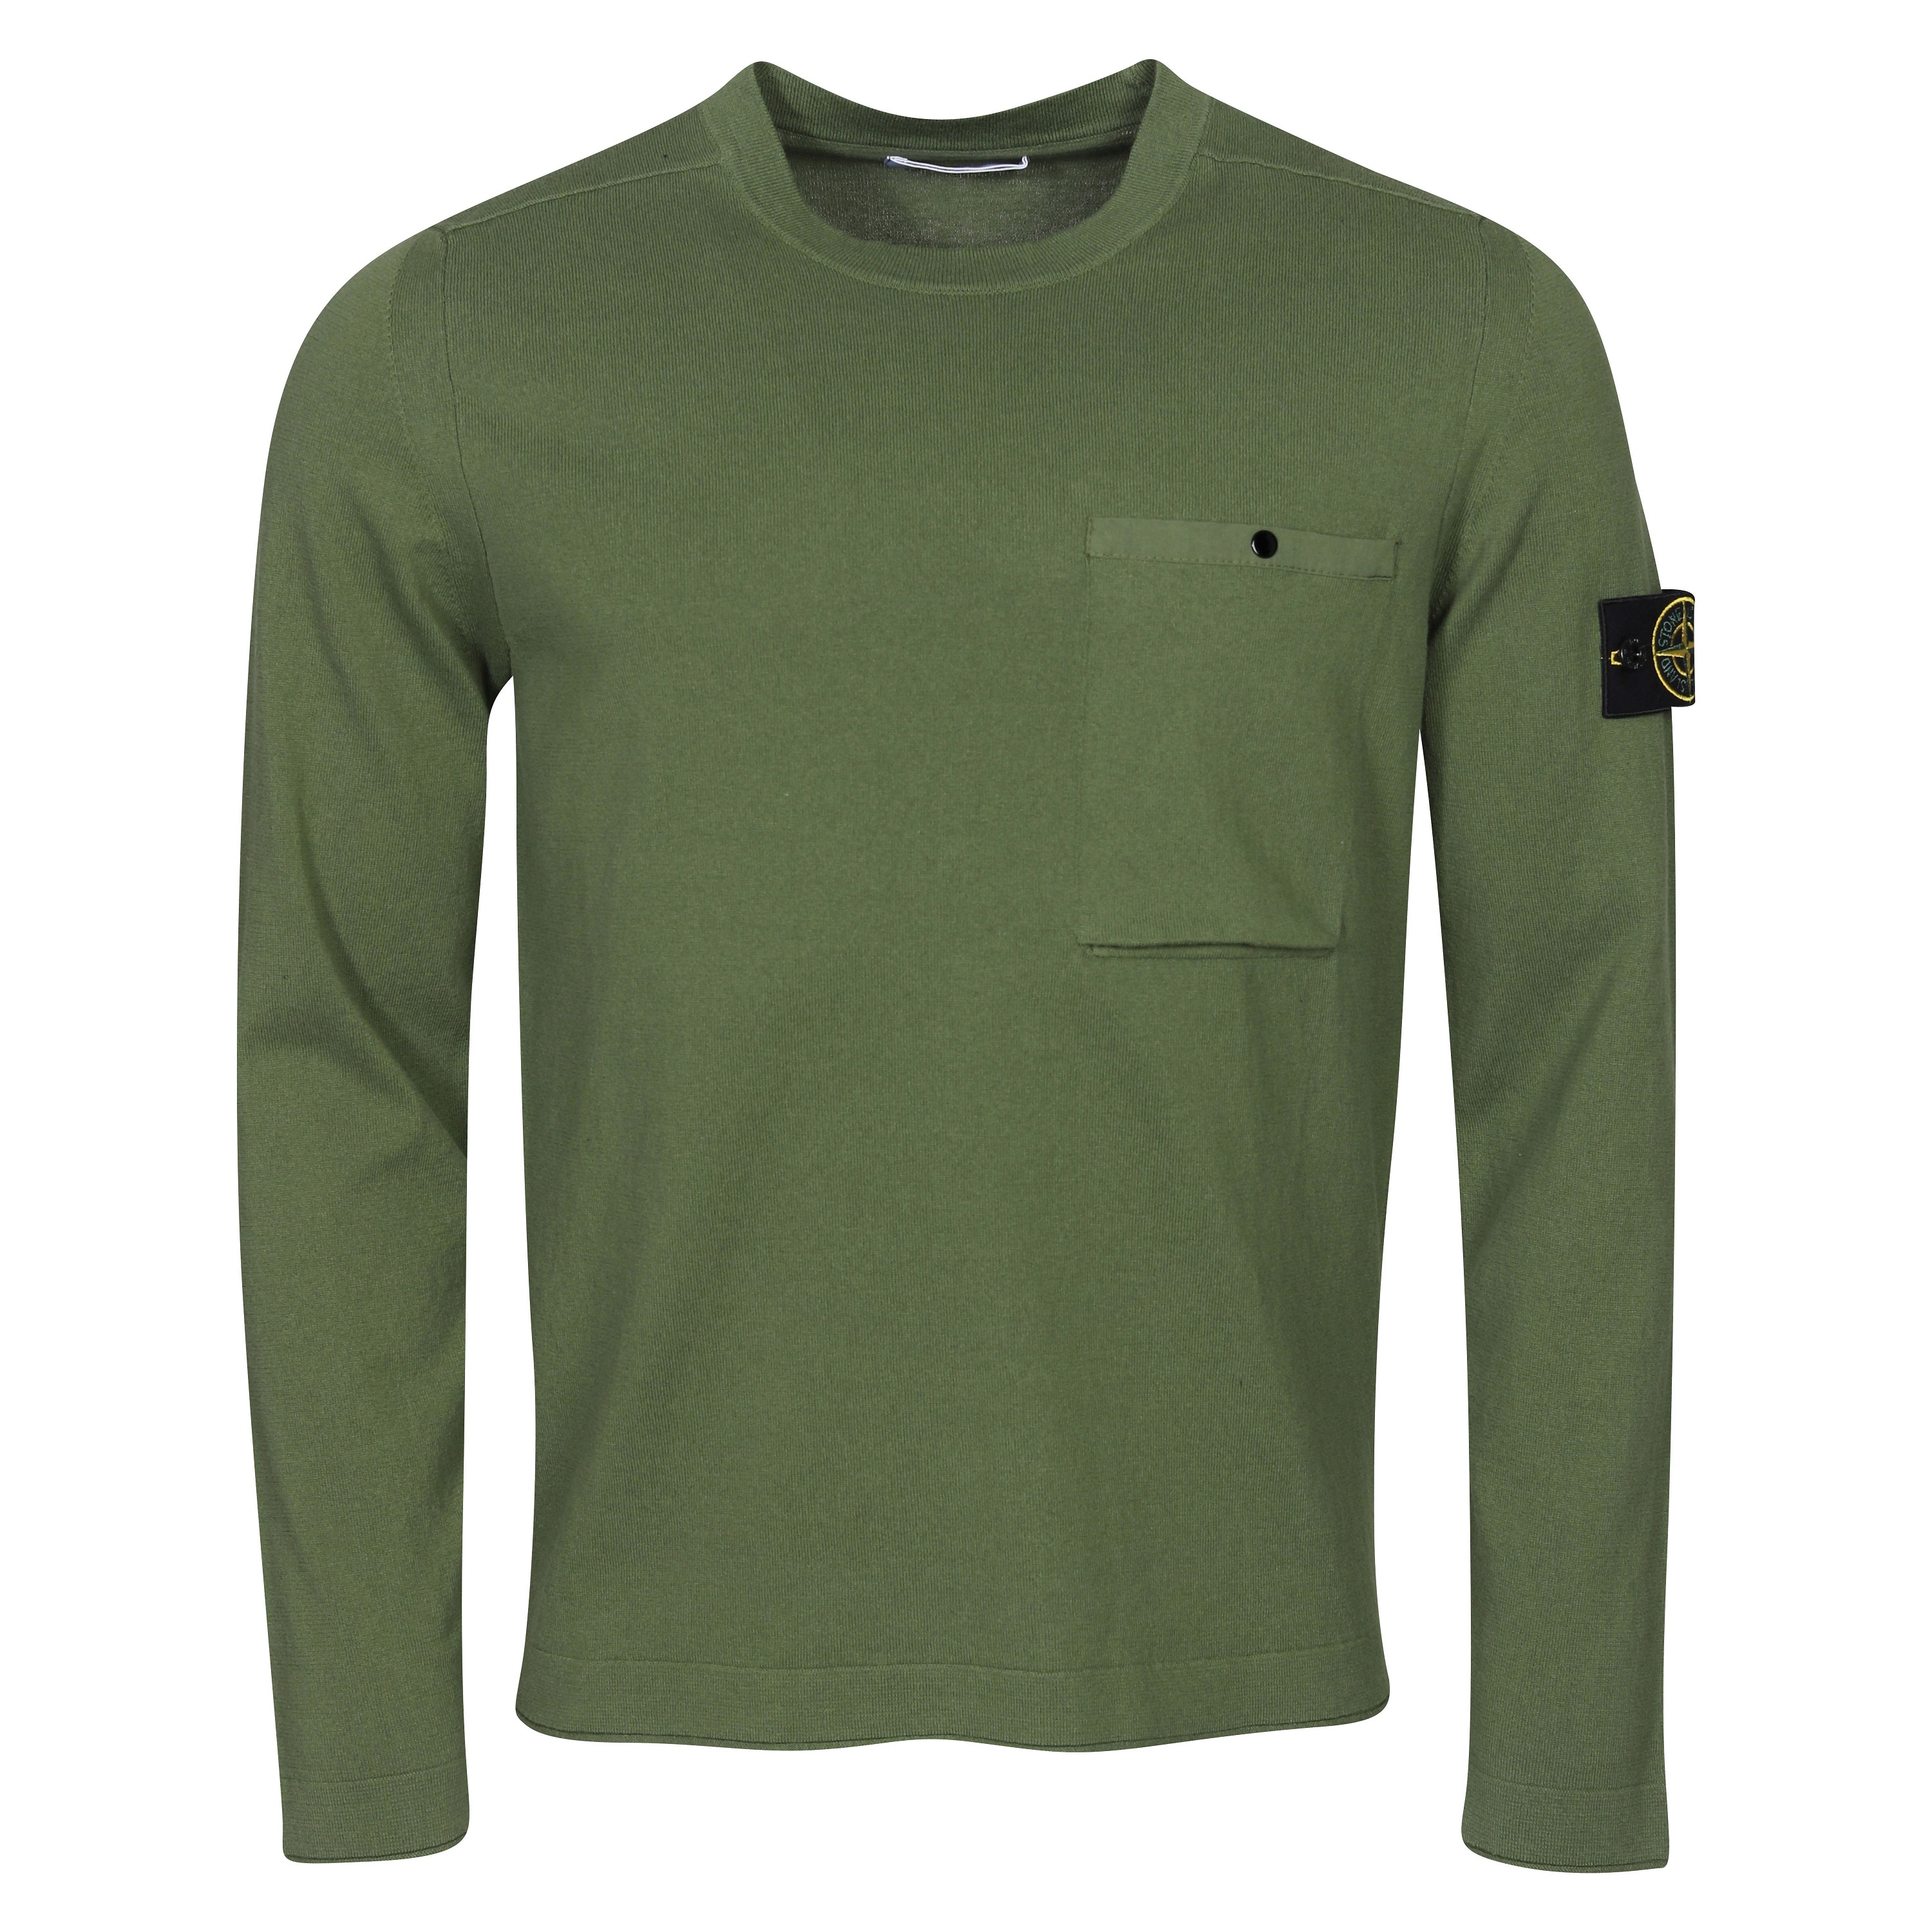 Stone Island Chest Pocket Knit Sweater in Olive  L